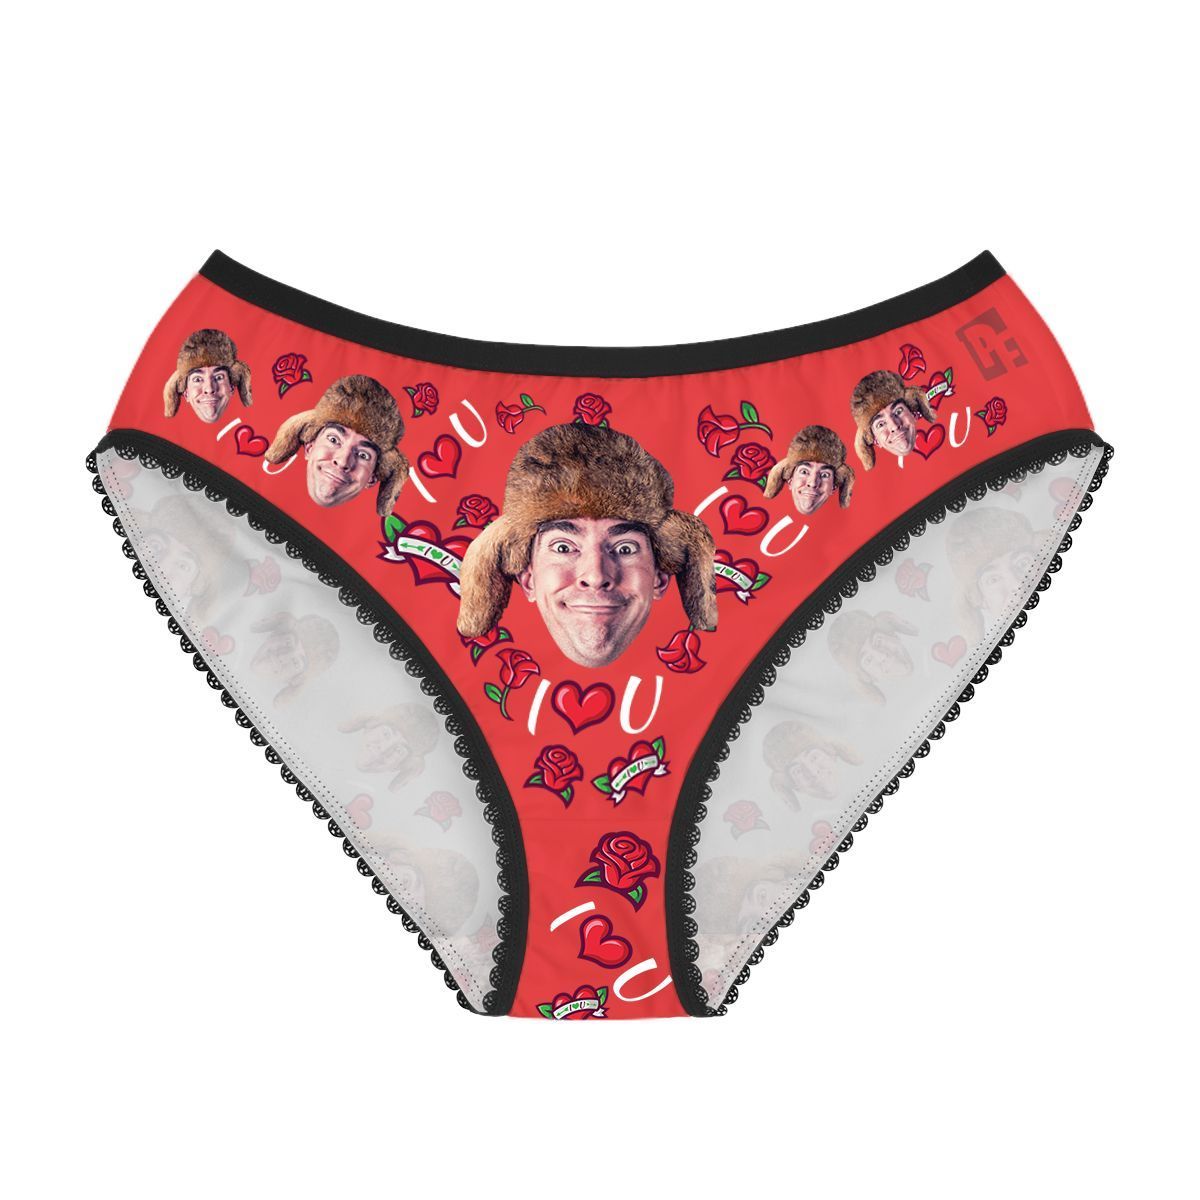 Red Valentines women's underwear briefs personalized with photo printed on them